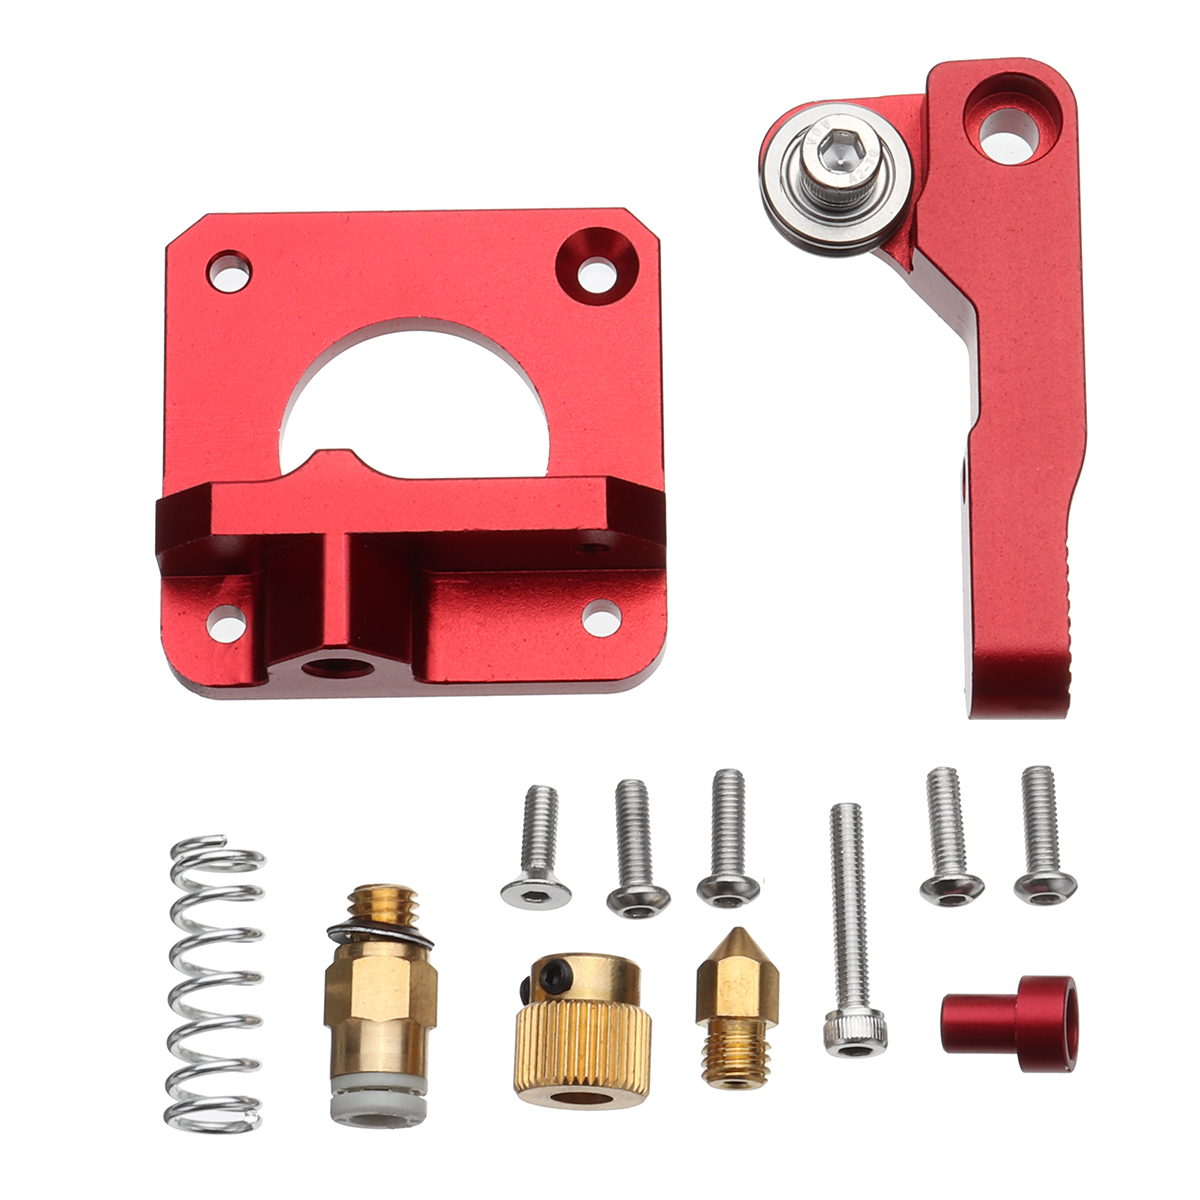 Upgraded Aluminum MK8 Extruder Drive Feed for CR-10 3D Printer Part 22